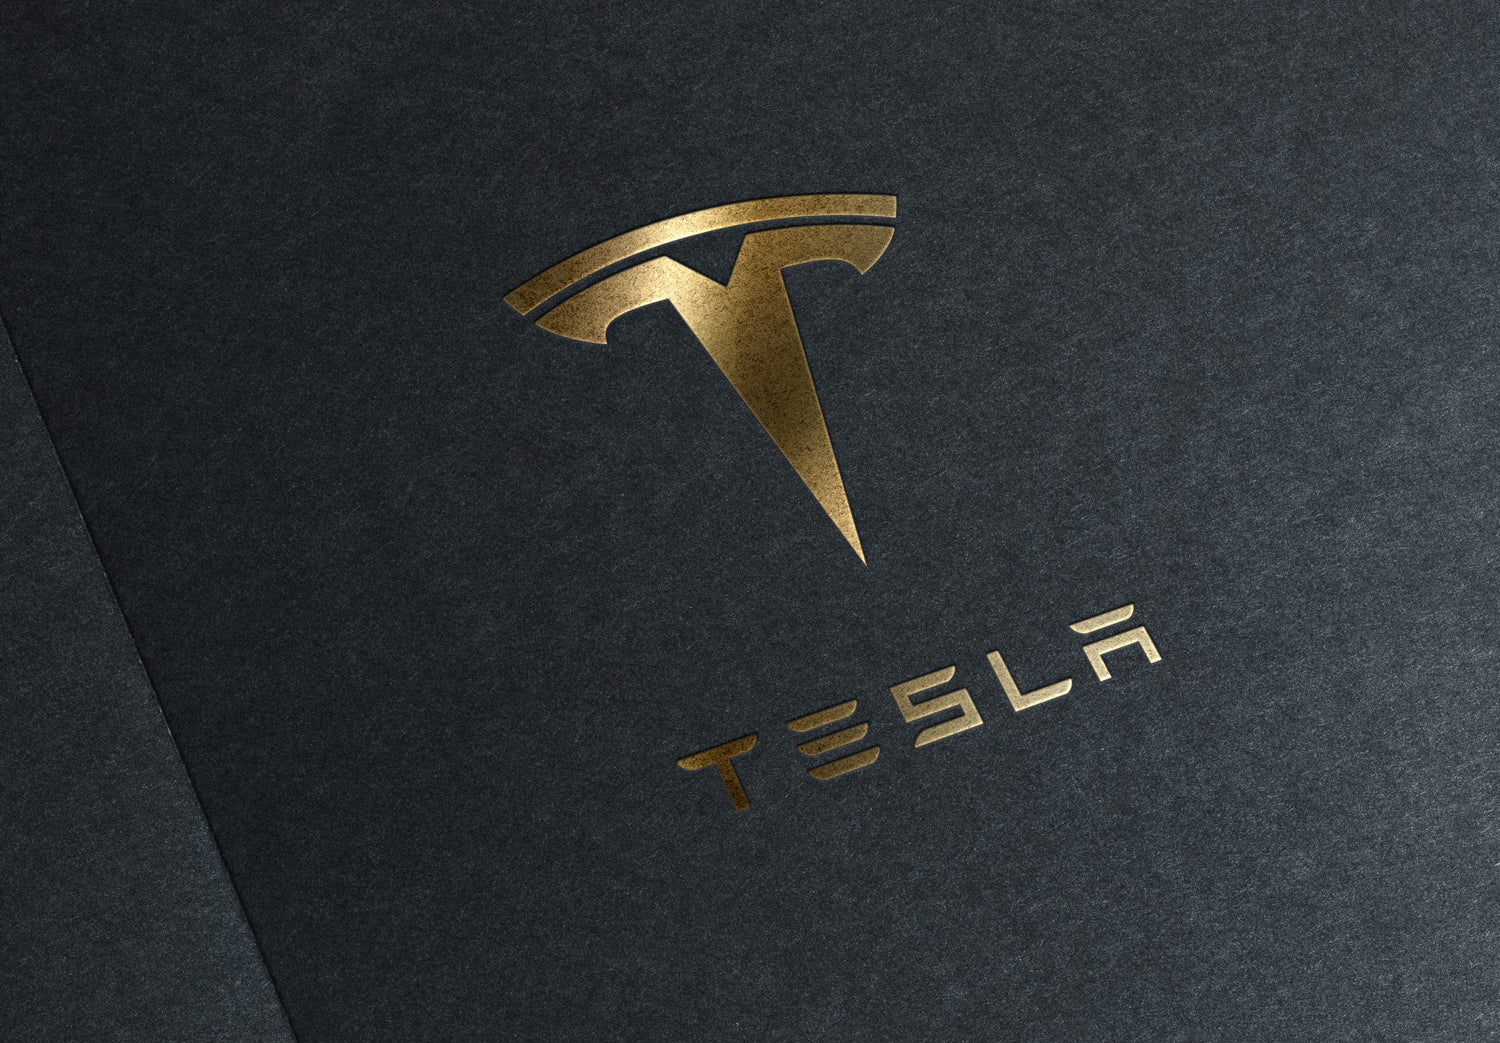 Tesla TSLA Stock Gets Price Target Boost to $715 from $560 at Wedbush